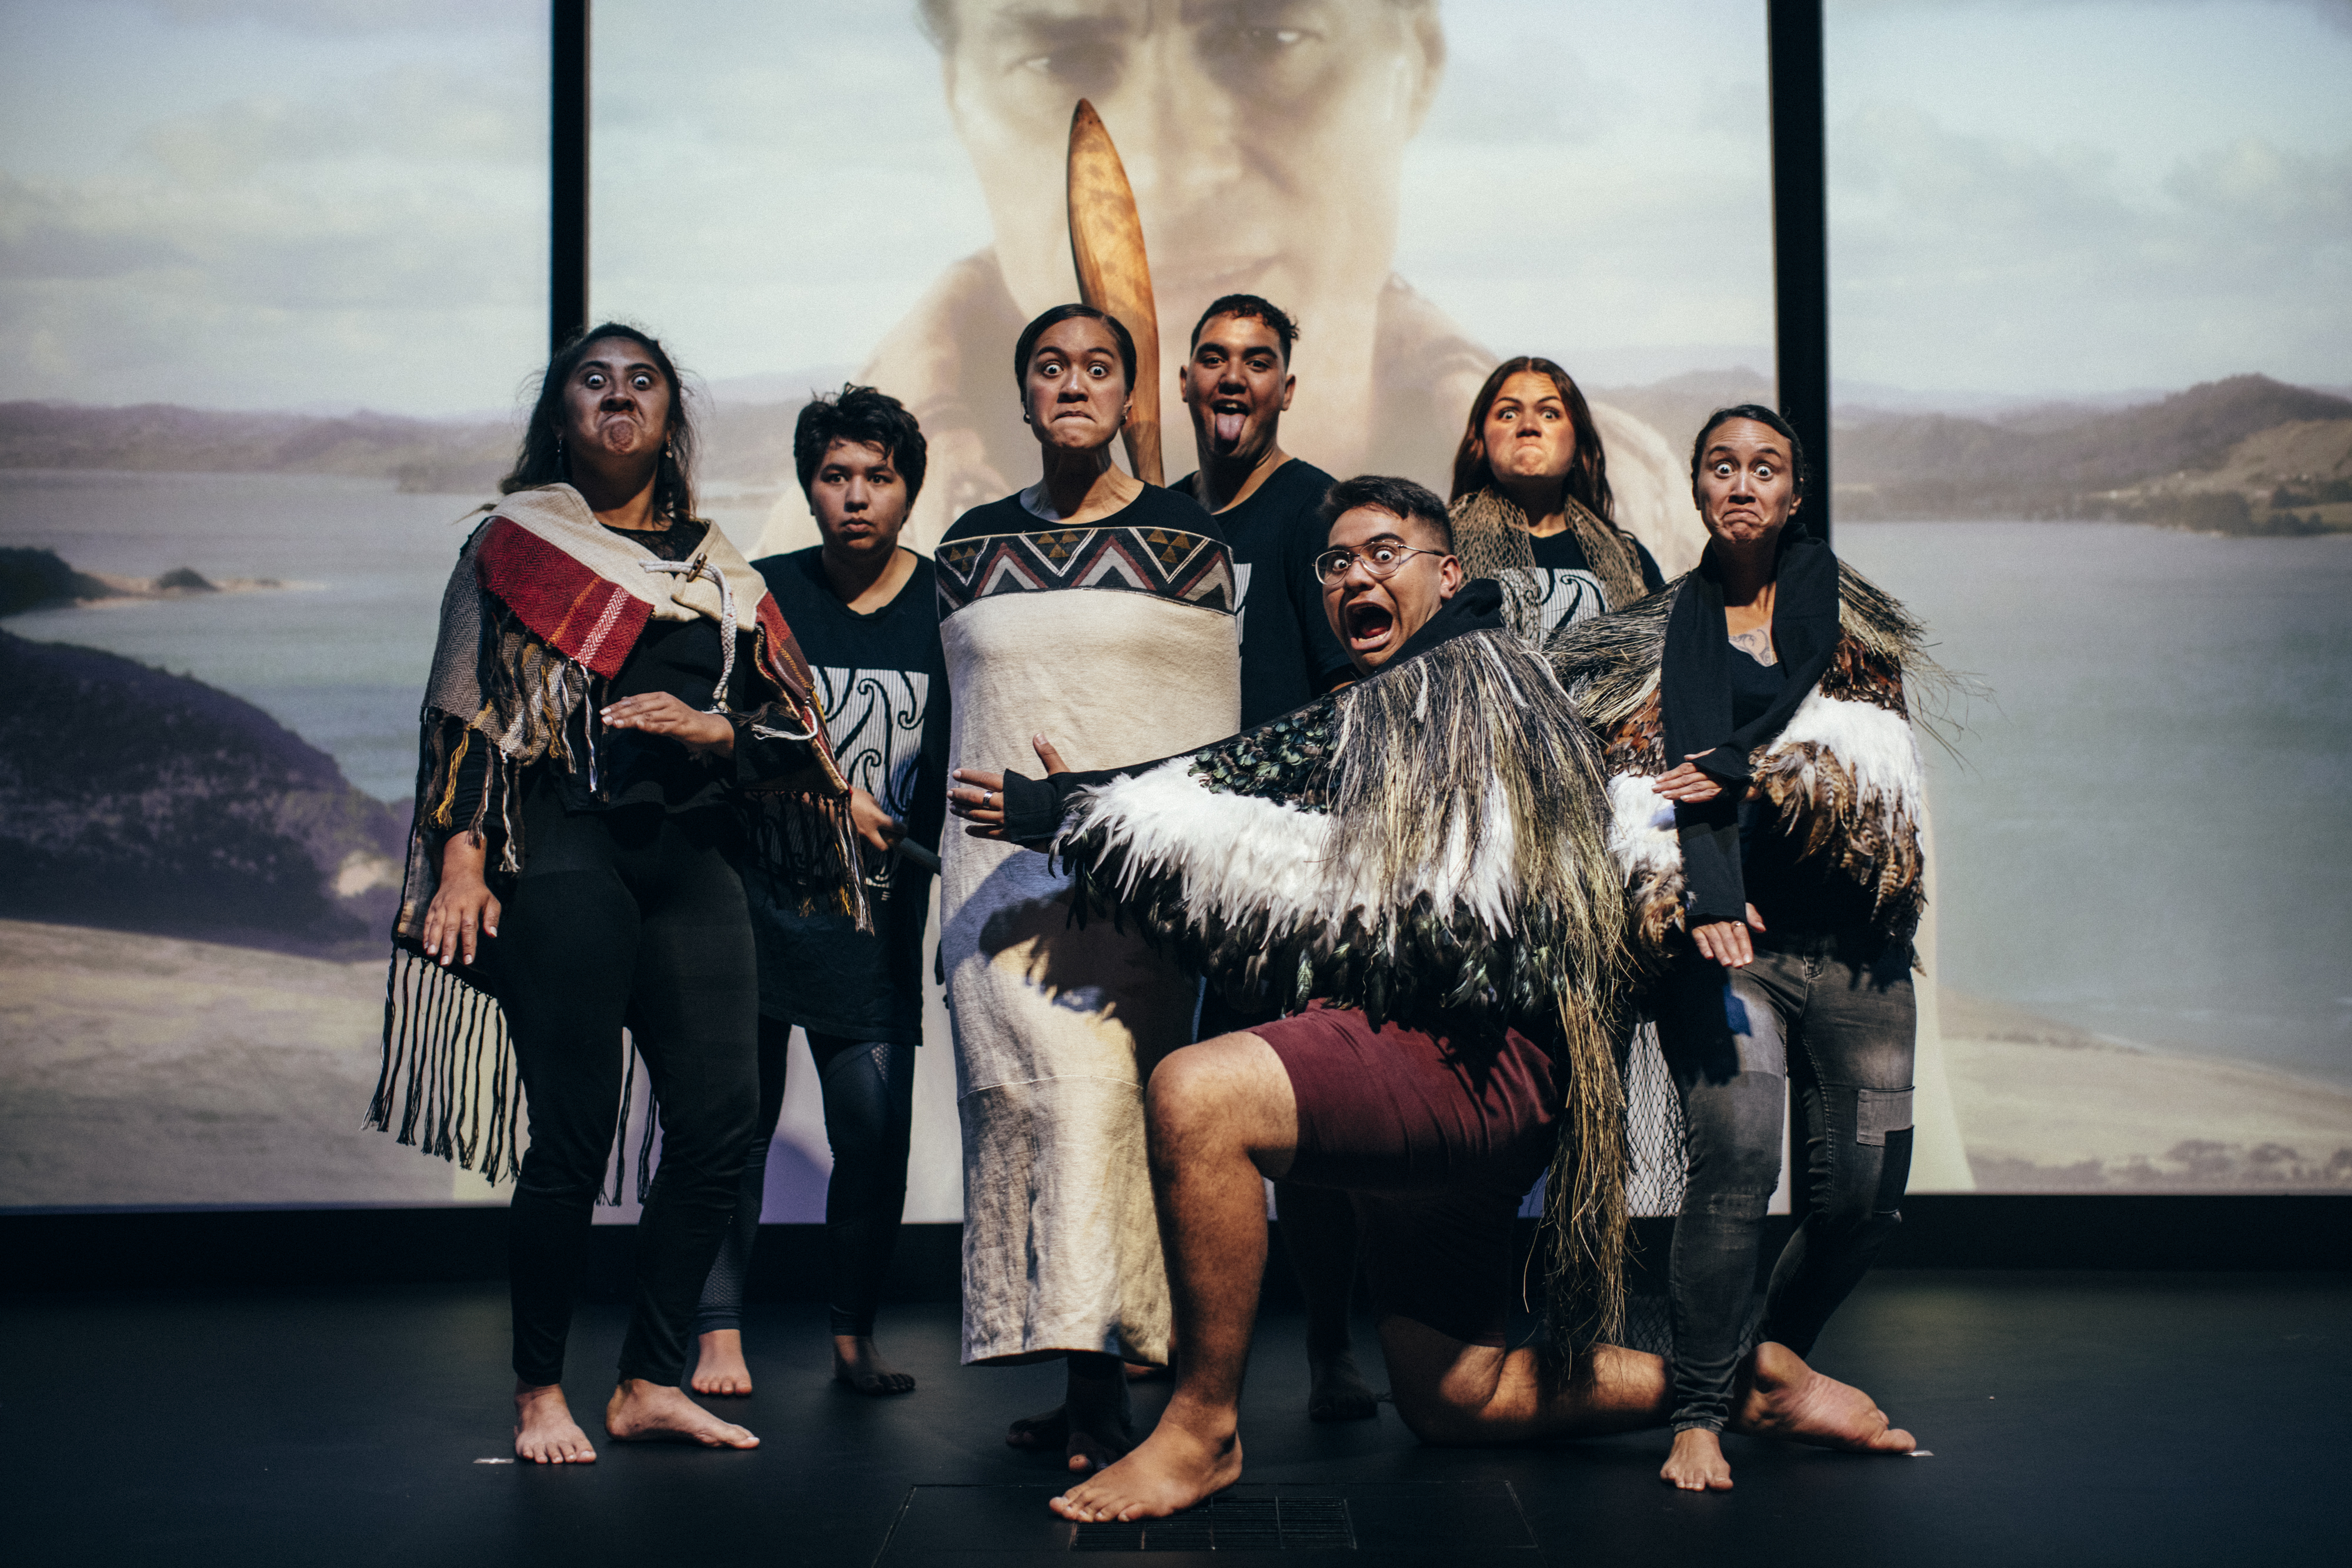 Several Māori youth grouped closely together. All are wearing a mix of modern and traditional clothing, and are performing a pūkana